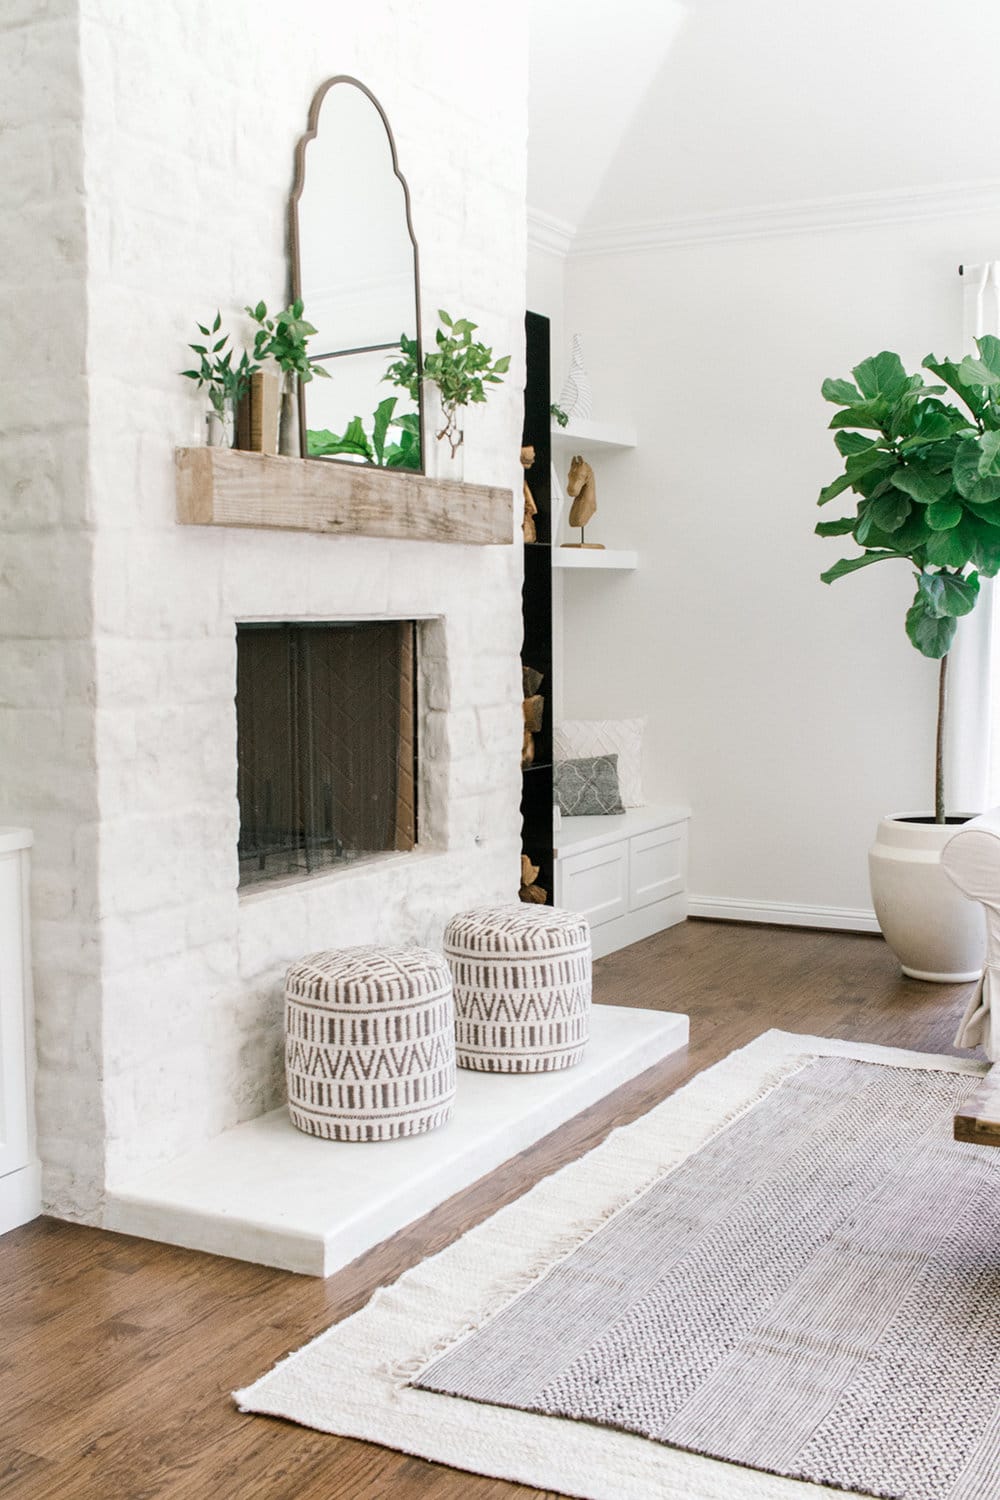 5 Fireplace Makeover Ideas